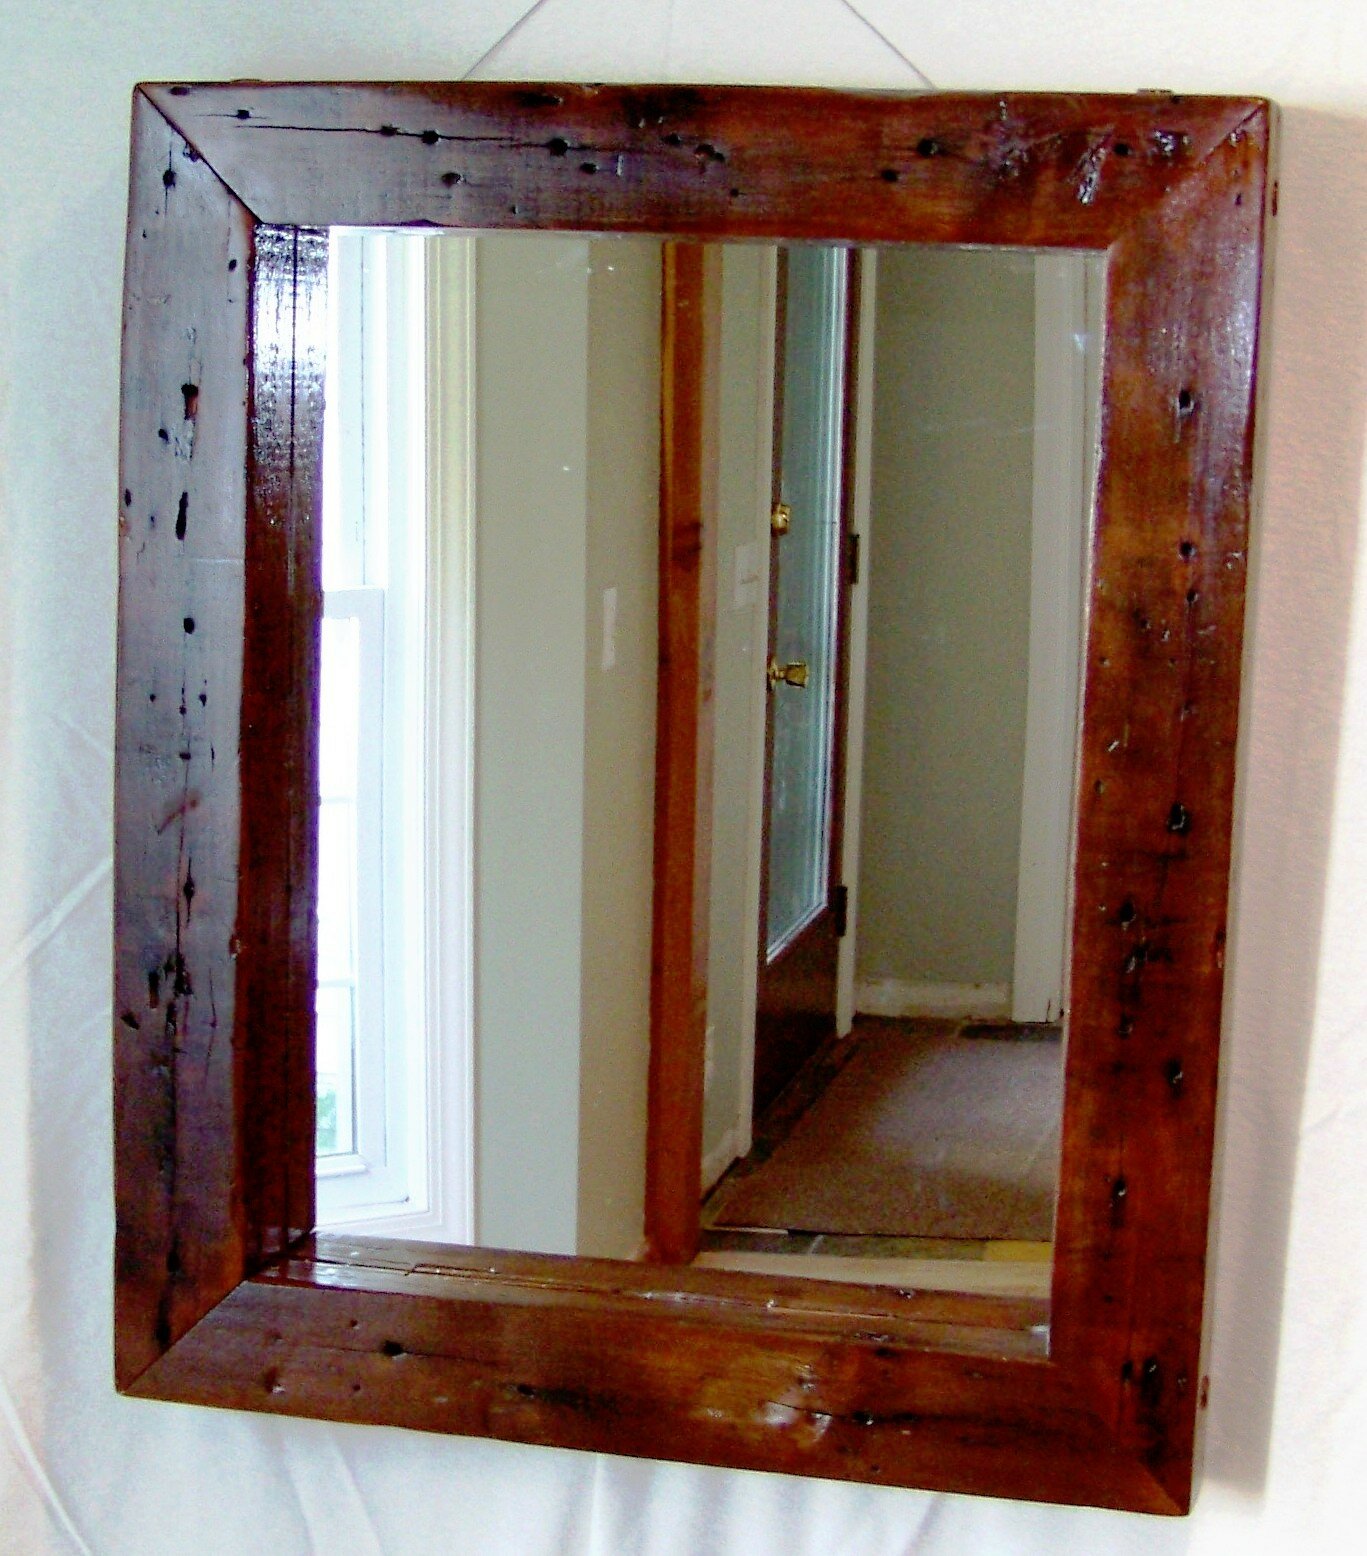 Mirror Reclaimed Wood | Round Metal Mirrors For Walls | Reclaimed Wood Mirror